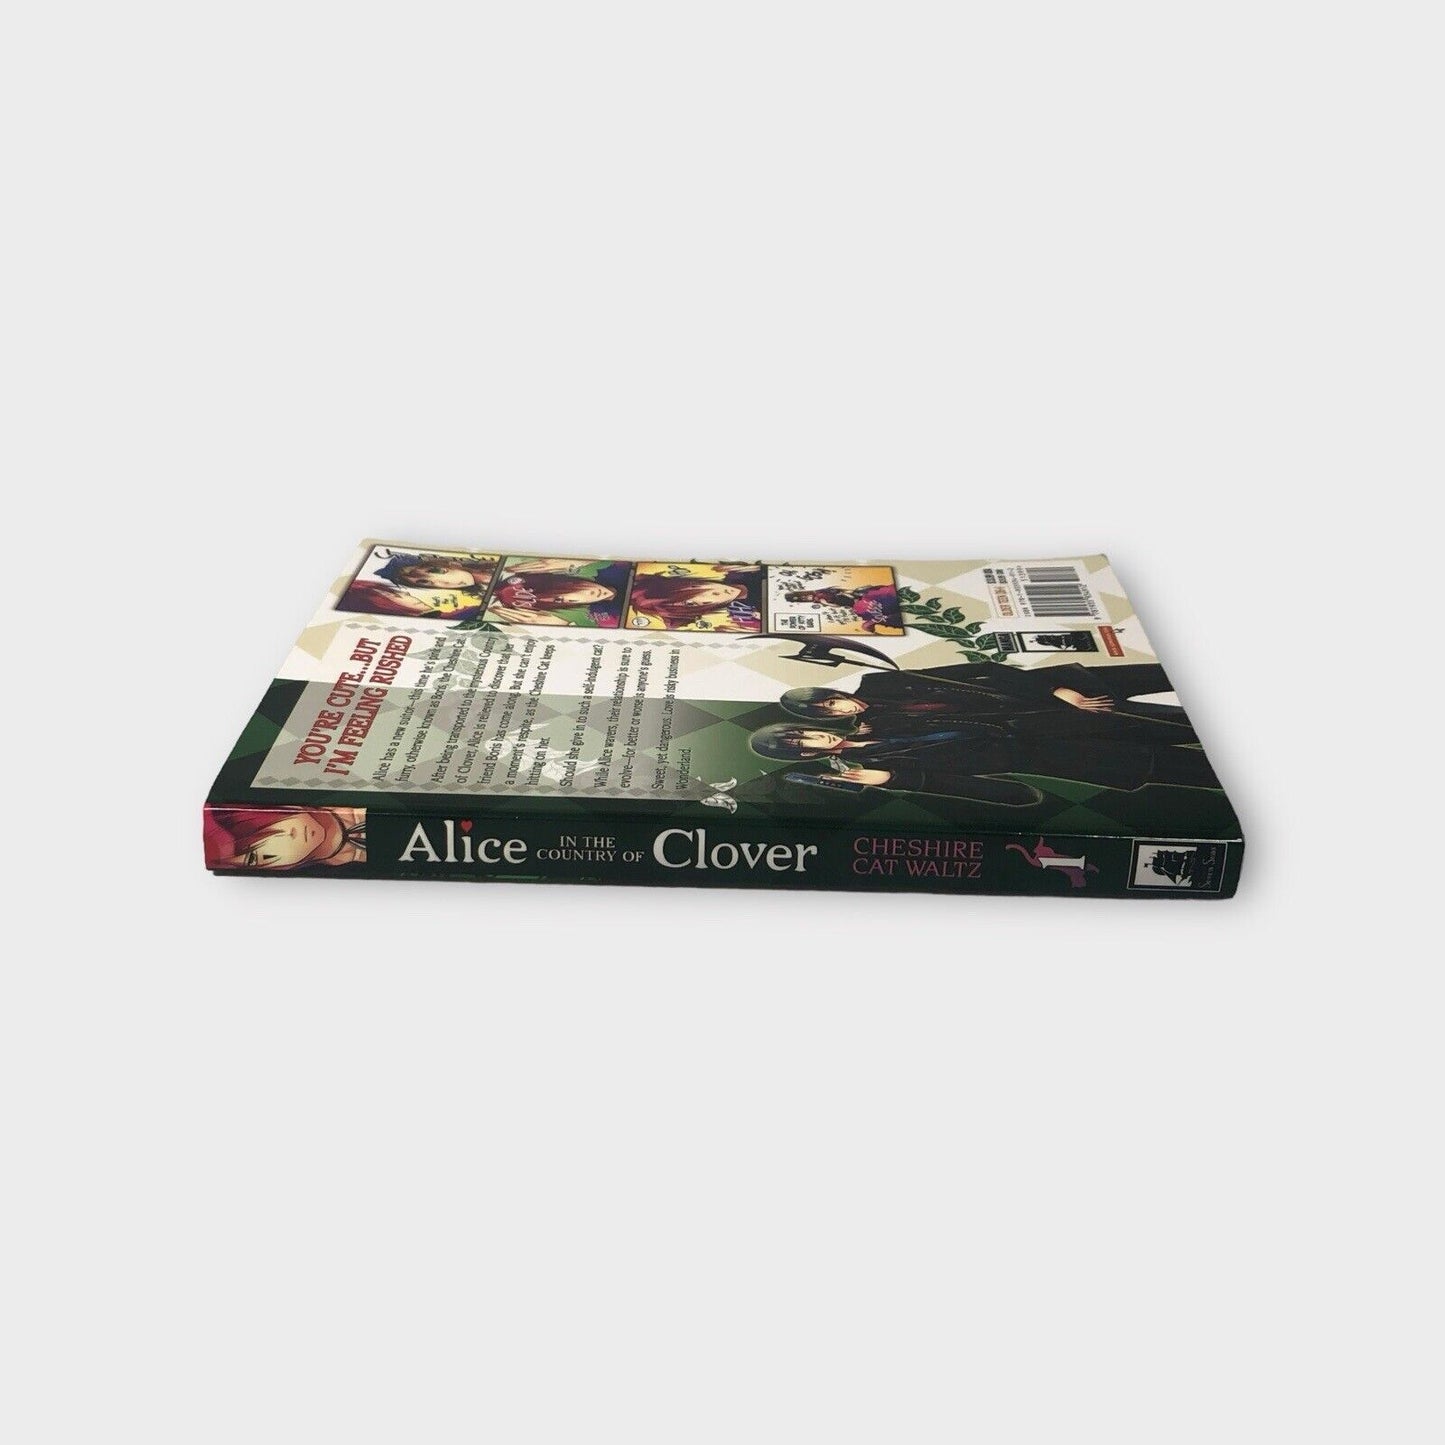 Alice in the Country of Clover: Cheshire Cat Waltz Volume #1-3 & March Hare Lot